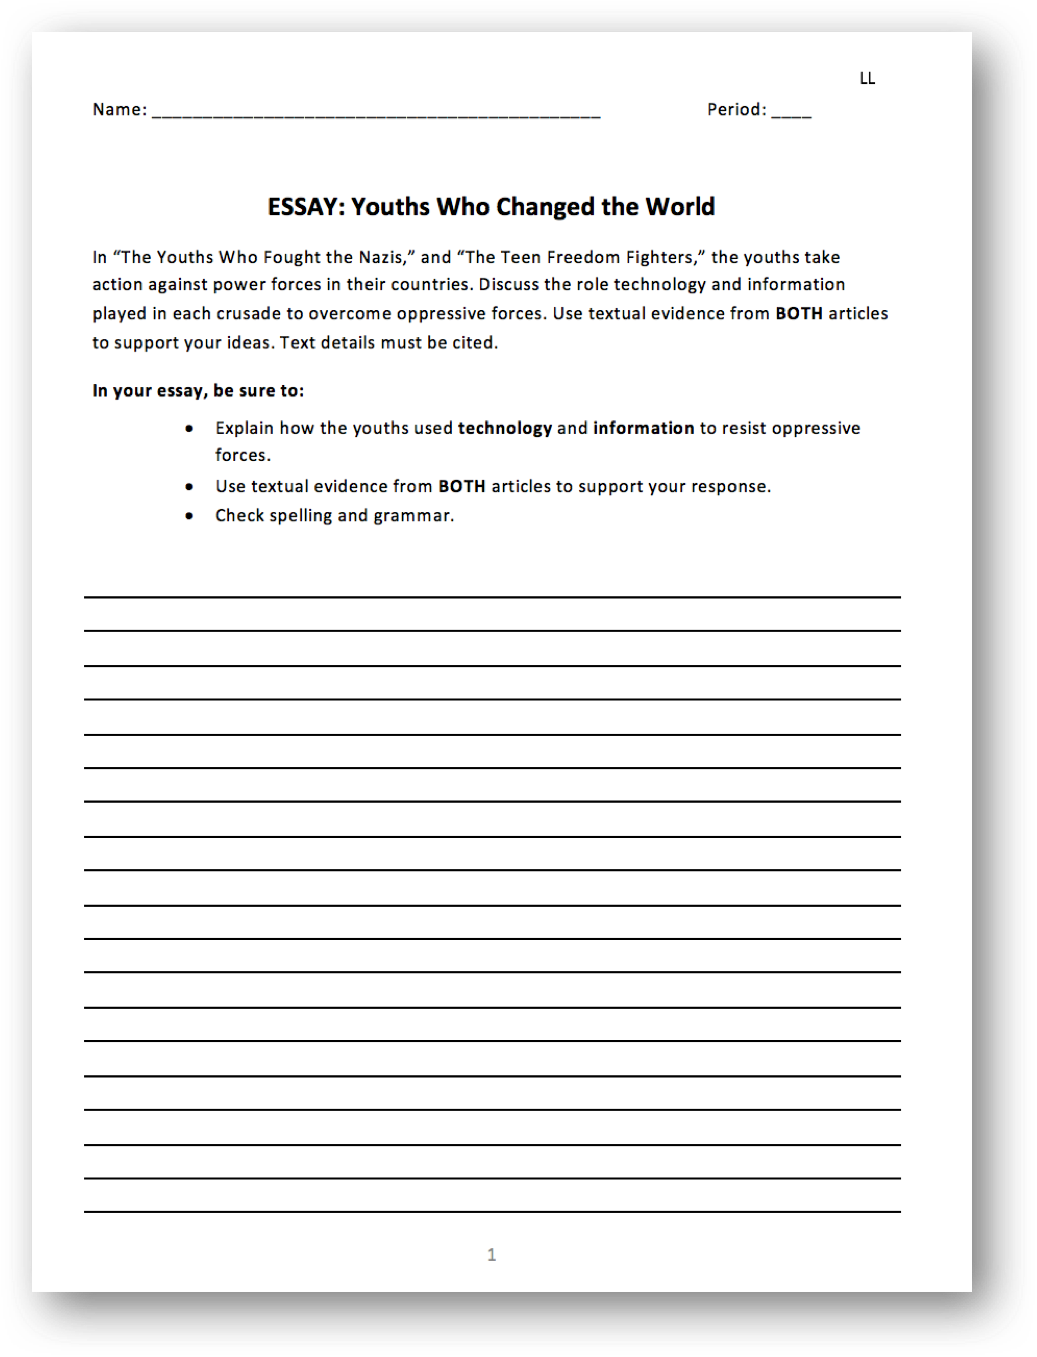 how youth can change the world essay